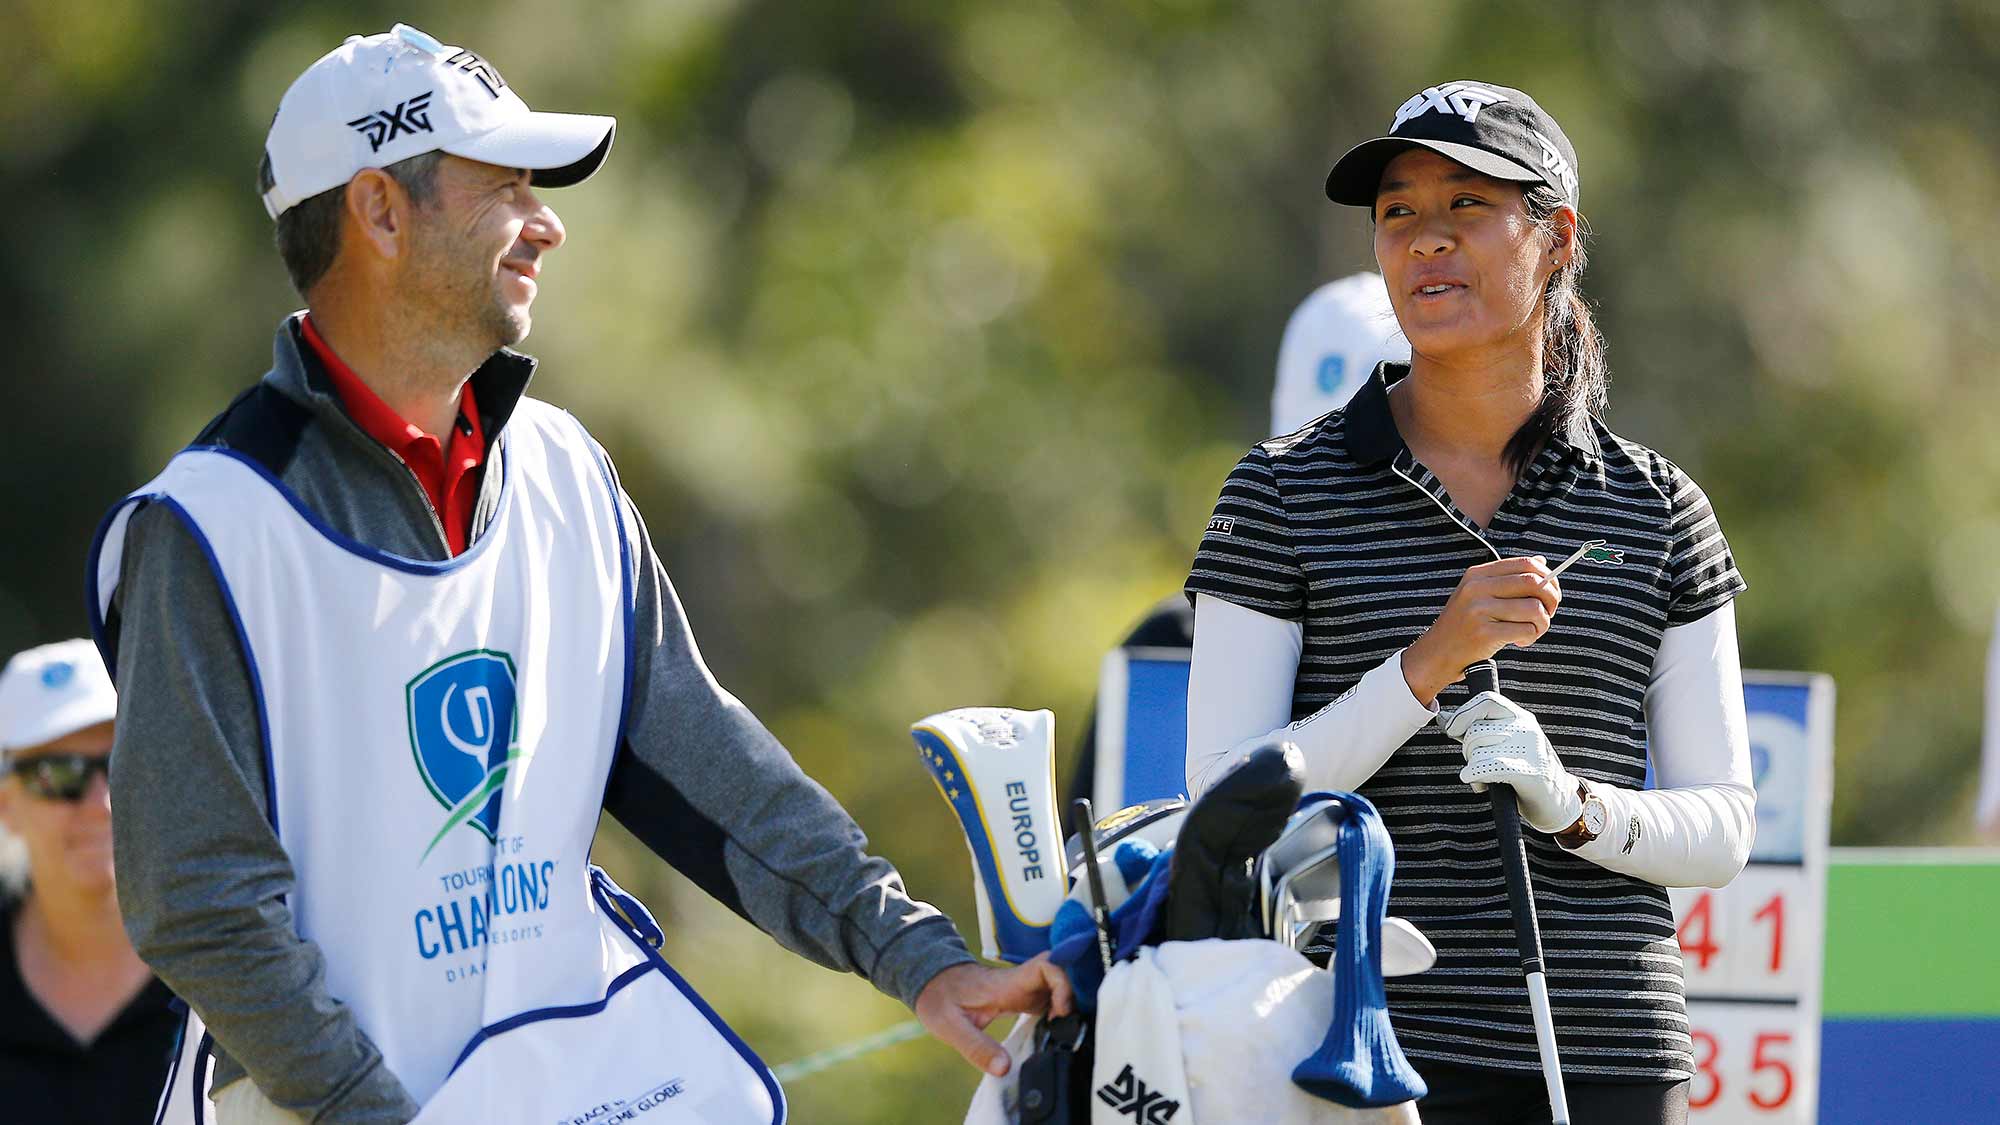 Celine Boutier of France talks with her caddie on the seventh tee during the second round of the Diamond Resorts Tournament of Champions at Tranquilo Golf Course at Four Seasons Golf and Sports Club Orlando on January 17, 2020 in Lake Buena Vista, Florida